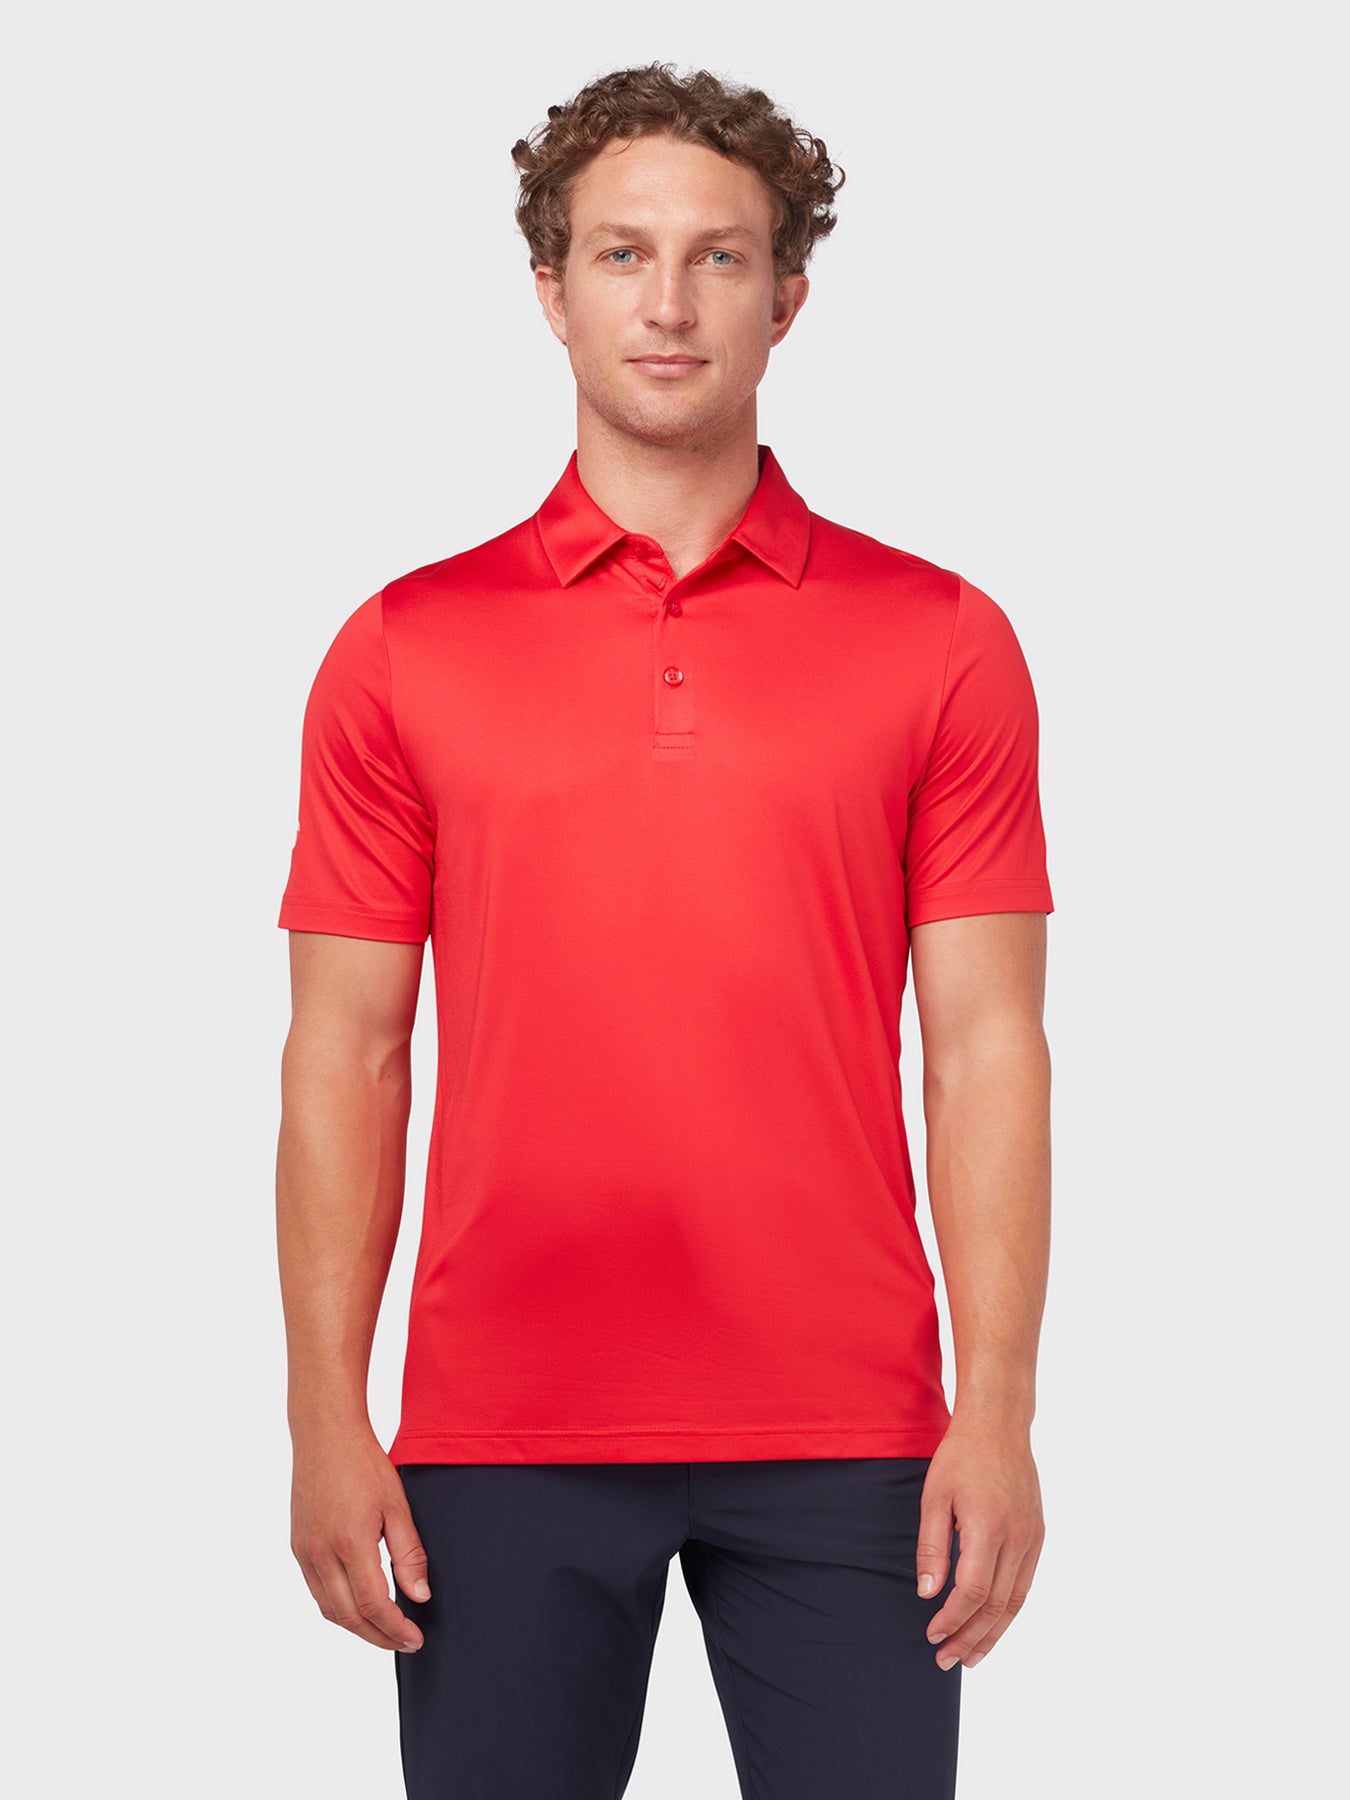 View Swing Tech Tour Polo In True Red True Red XS information